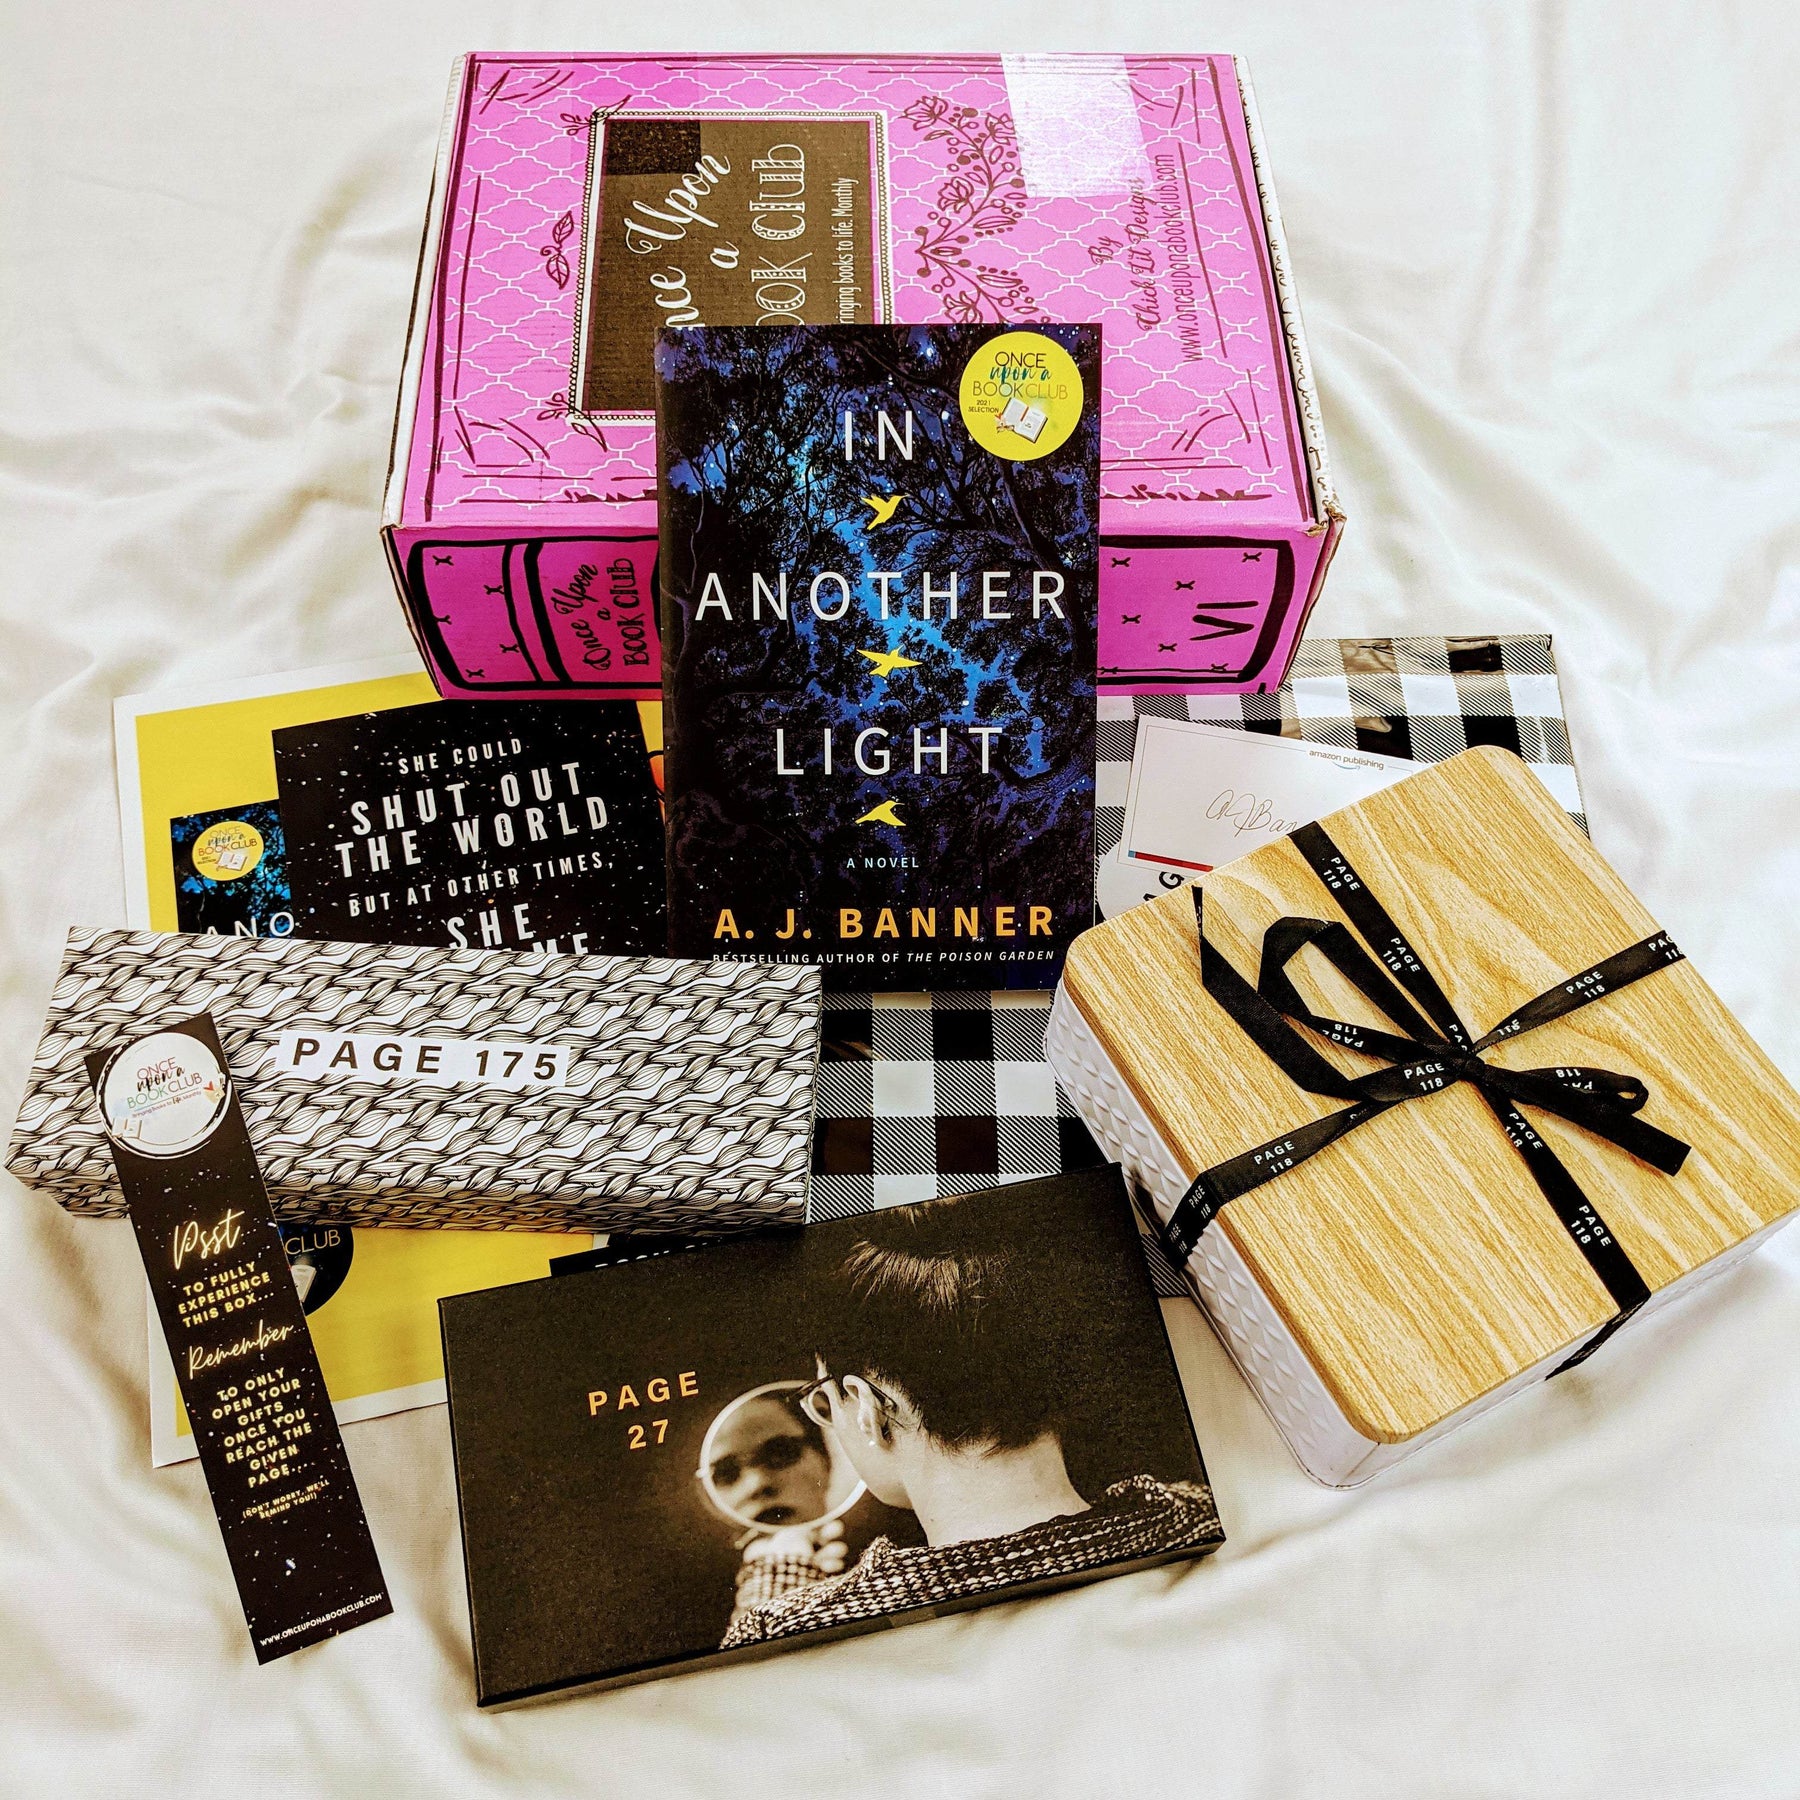 What are the different types of book box subscriptions? – Once Upon a Book  Club